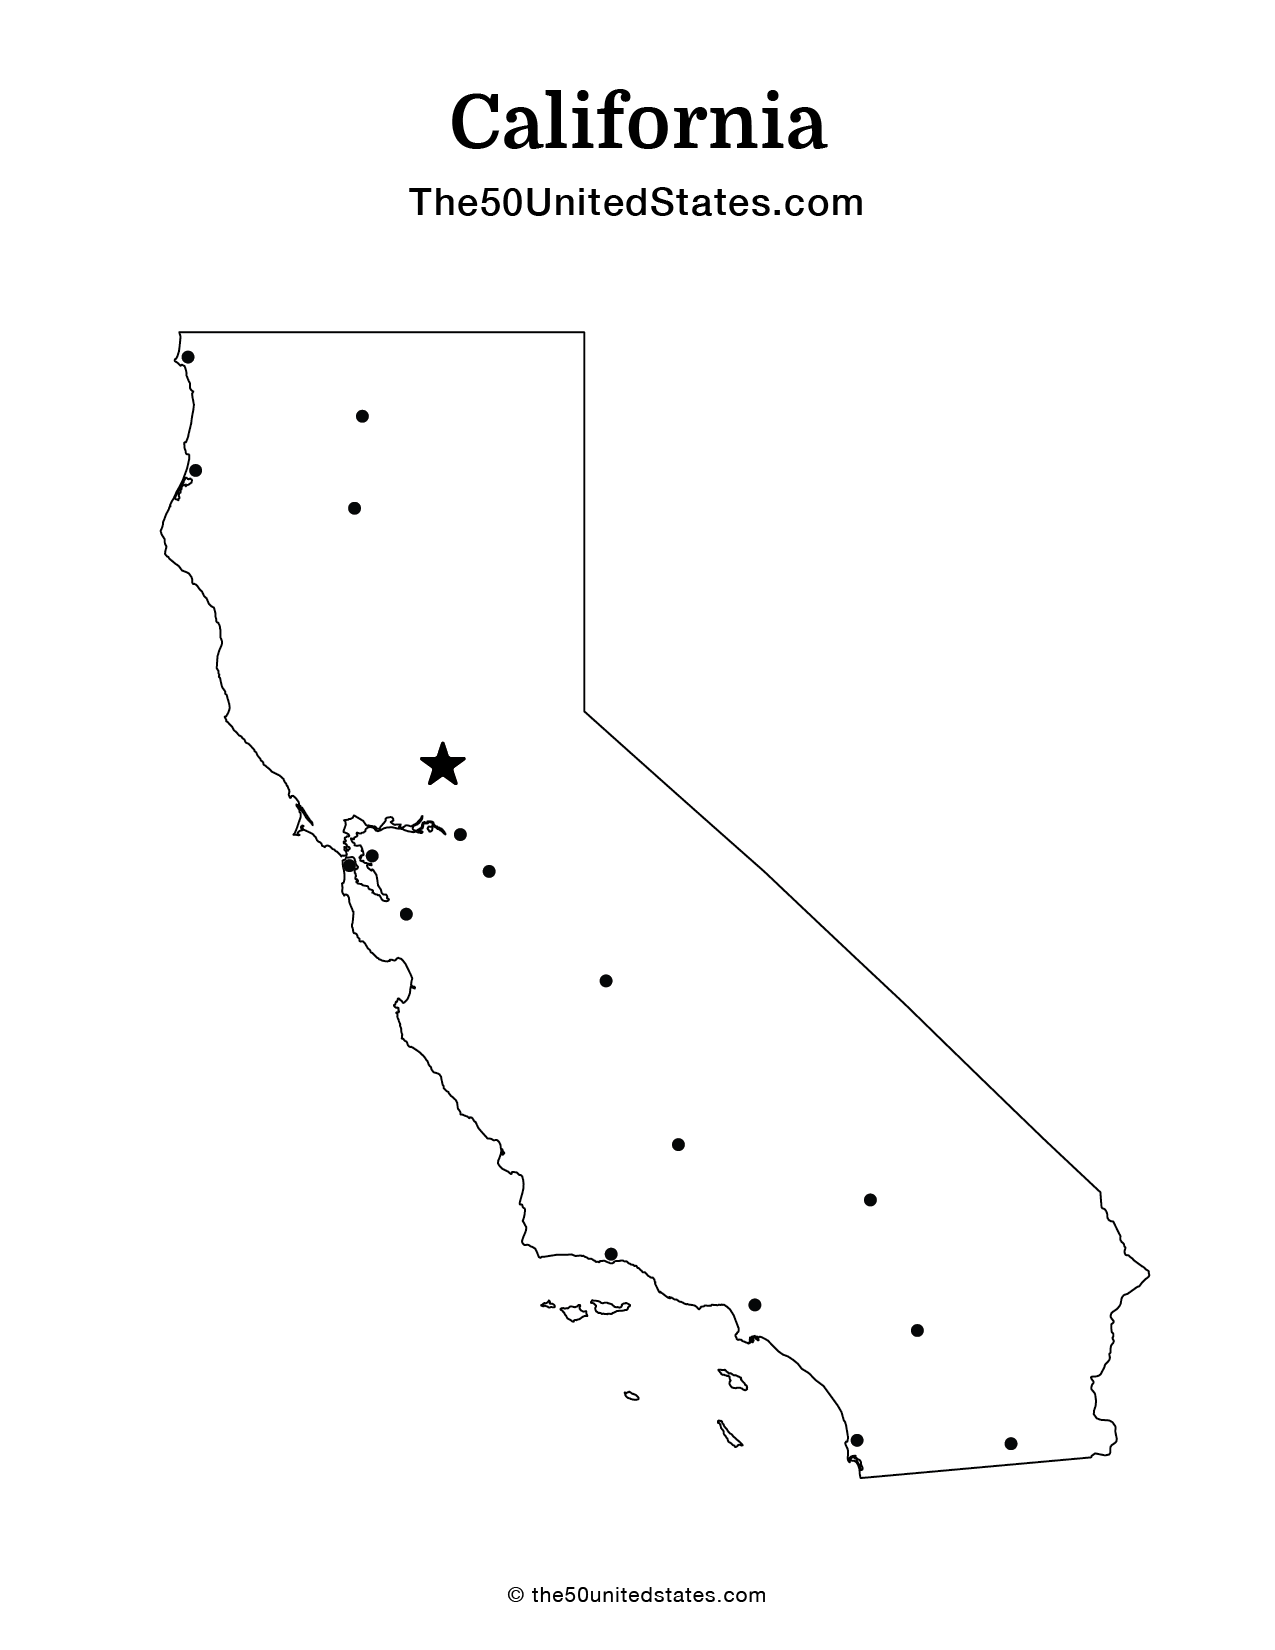 California with Cities (Blank)